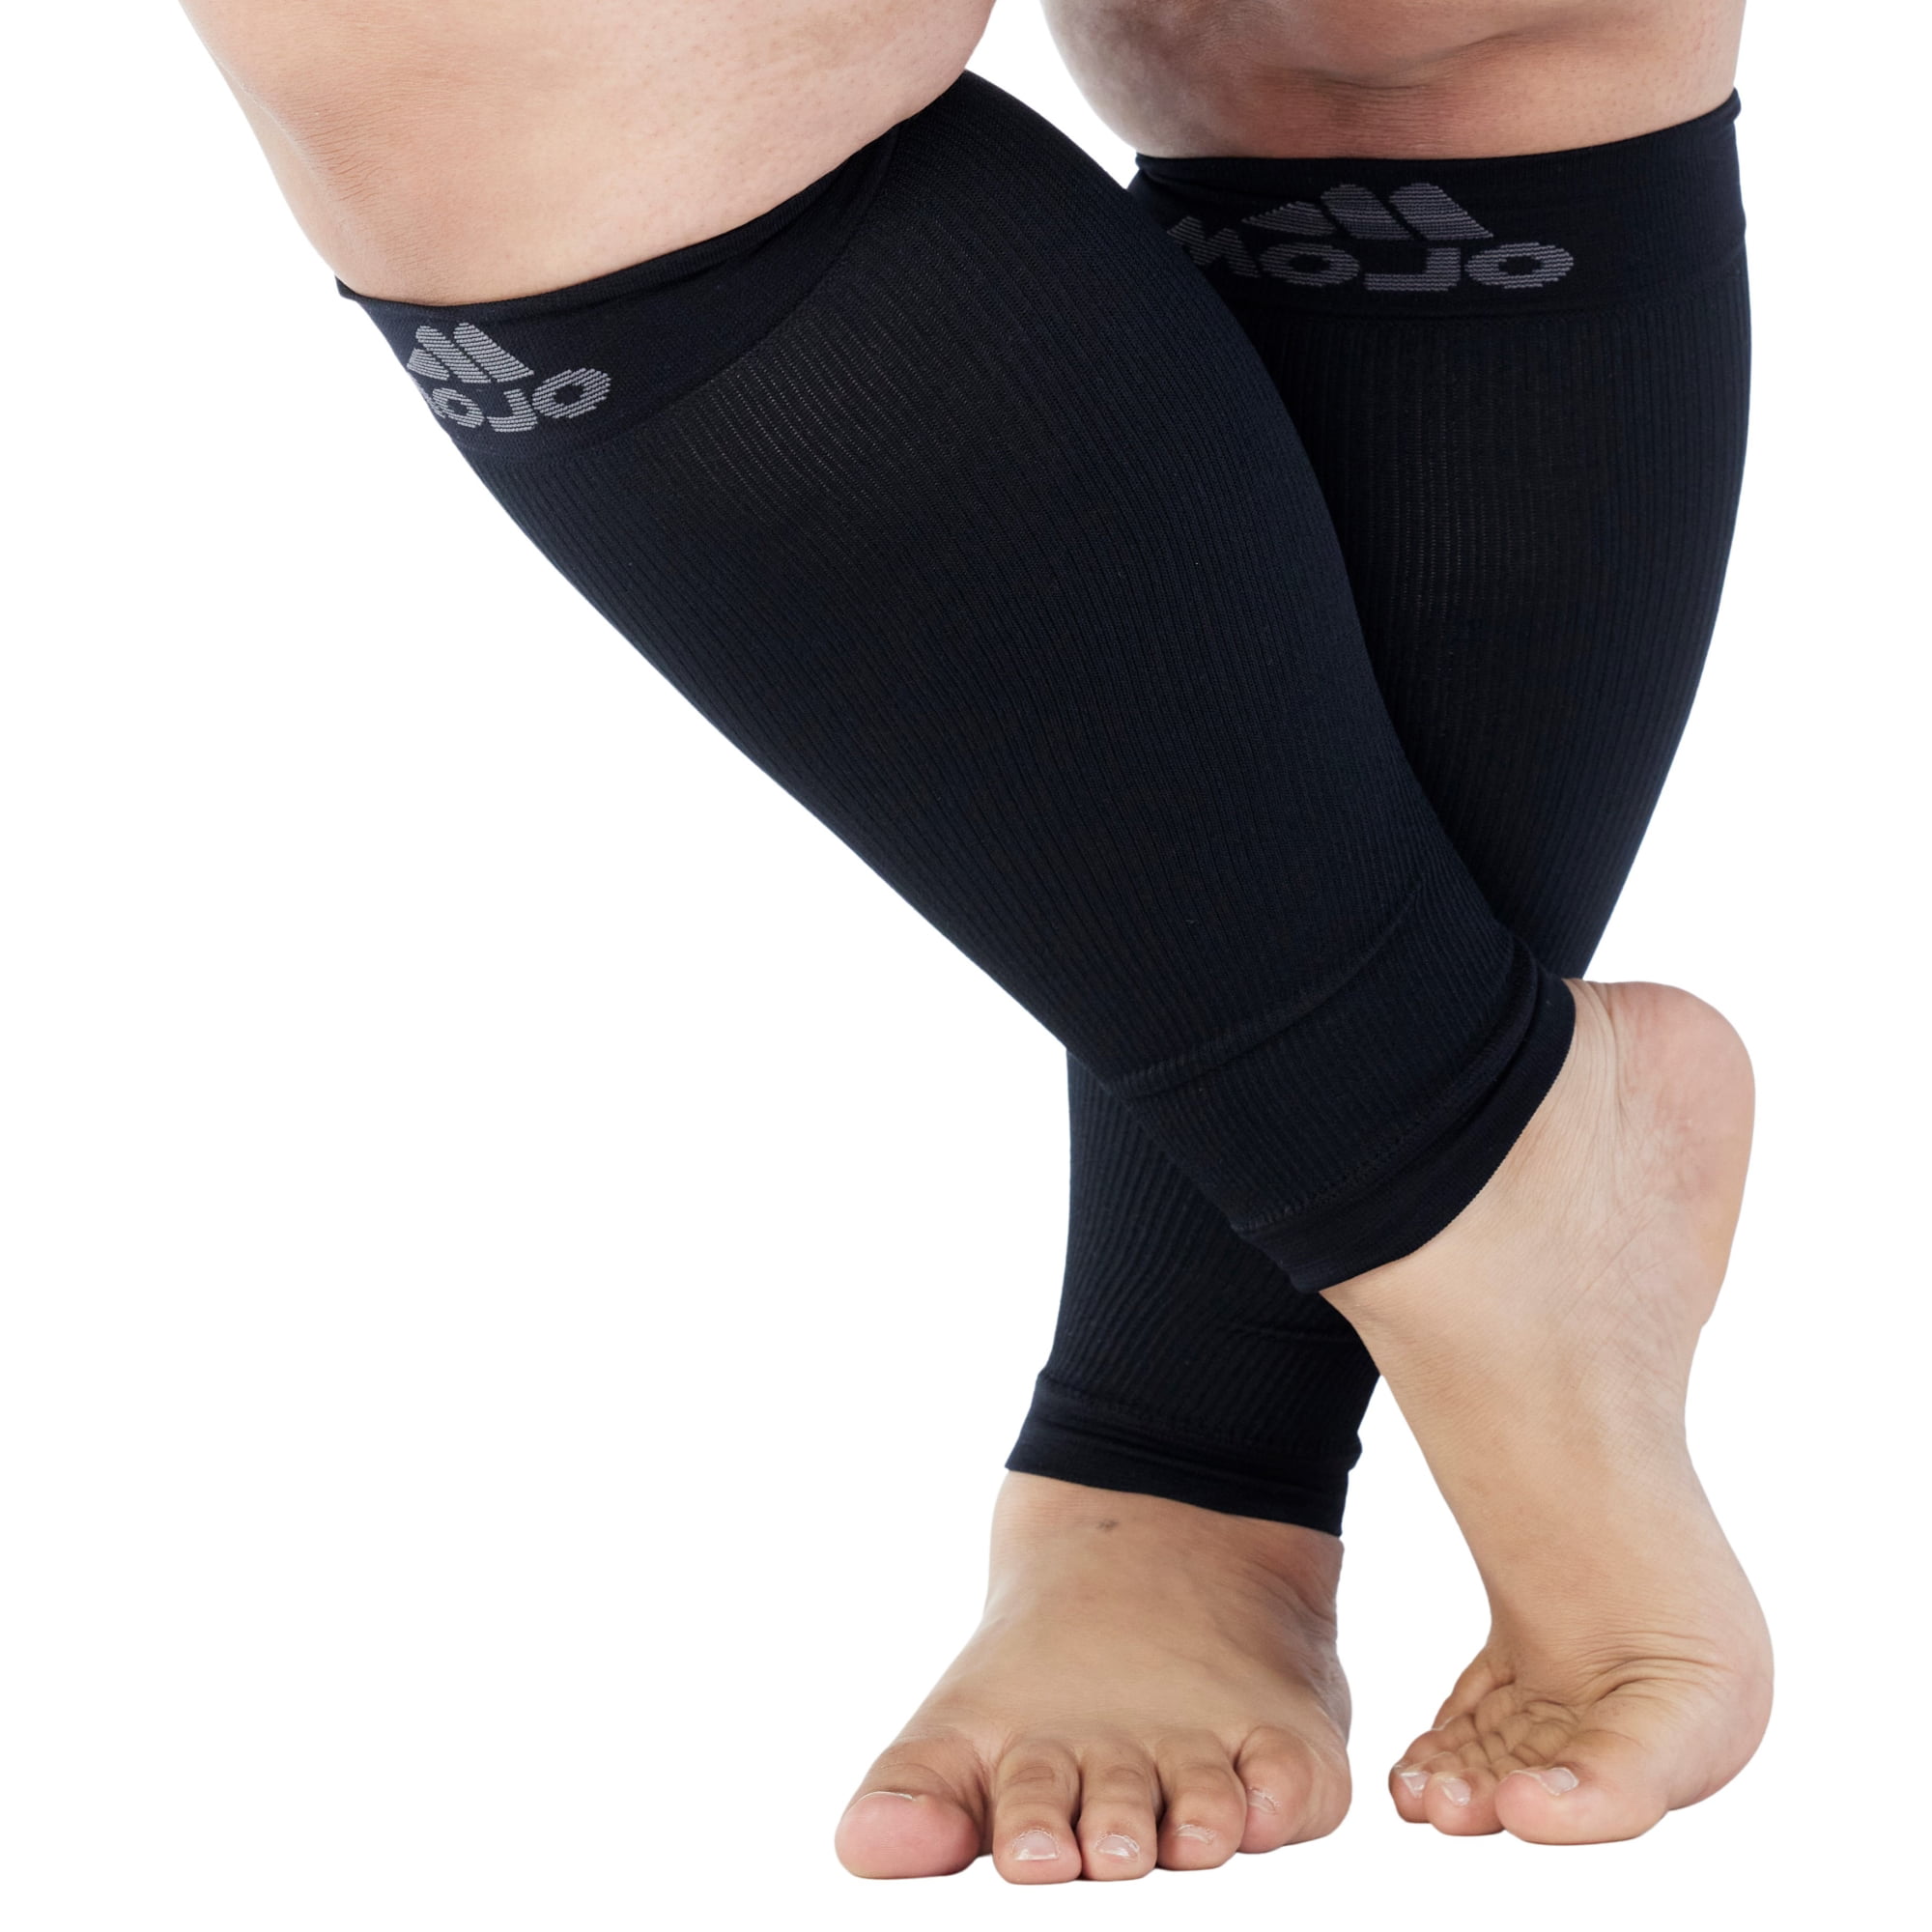 S/M, Black / Blue Gift 2Pair Calf Support Compression Leg Sleeve Sport Sock Outdoor Activit Reduce Pain Swelling 